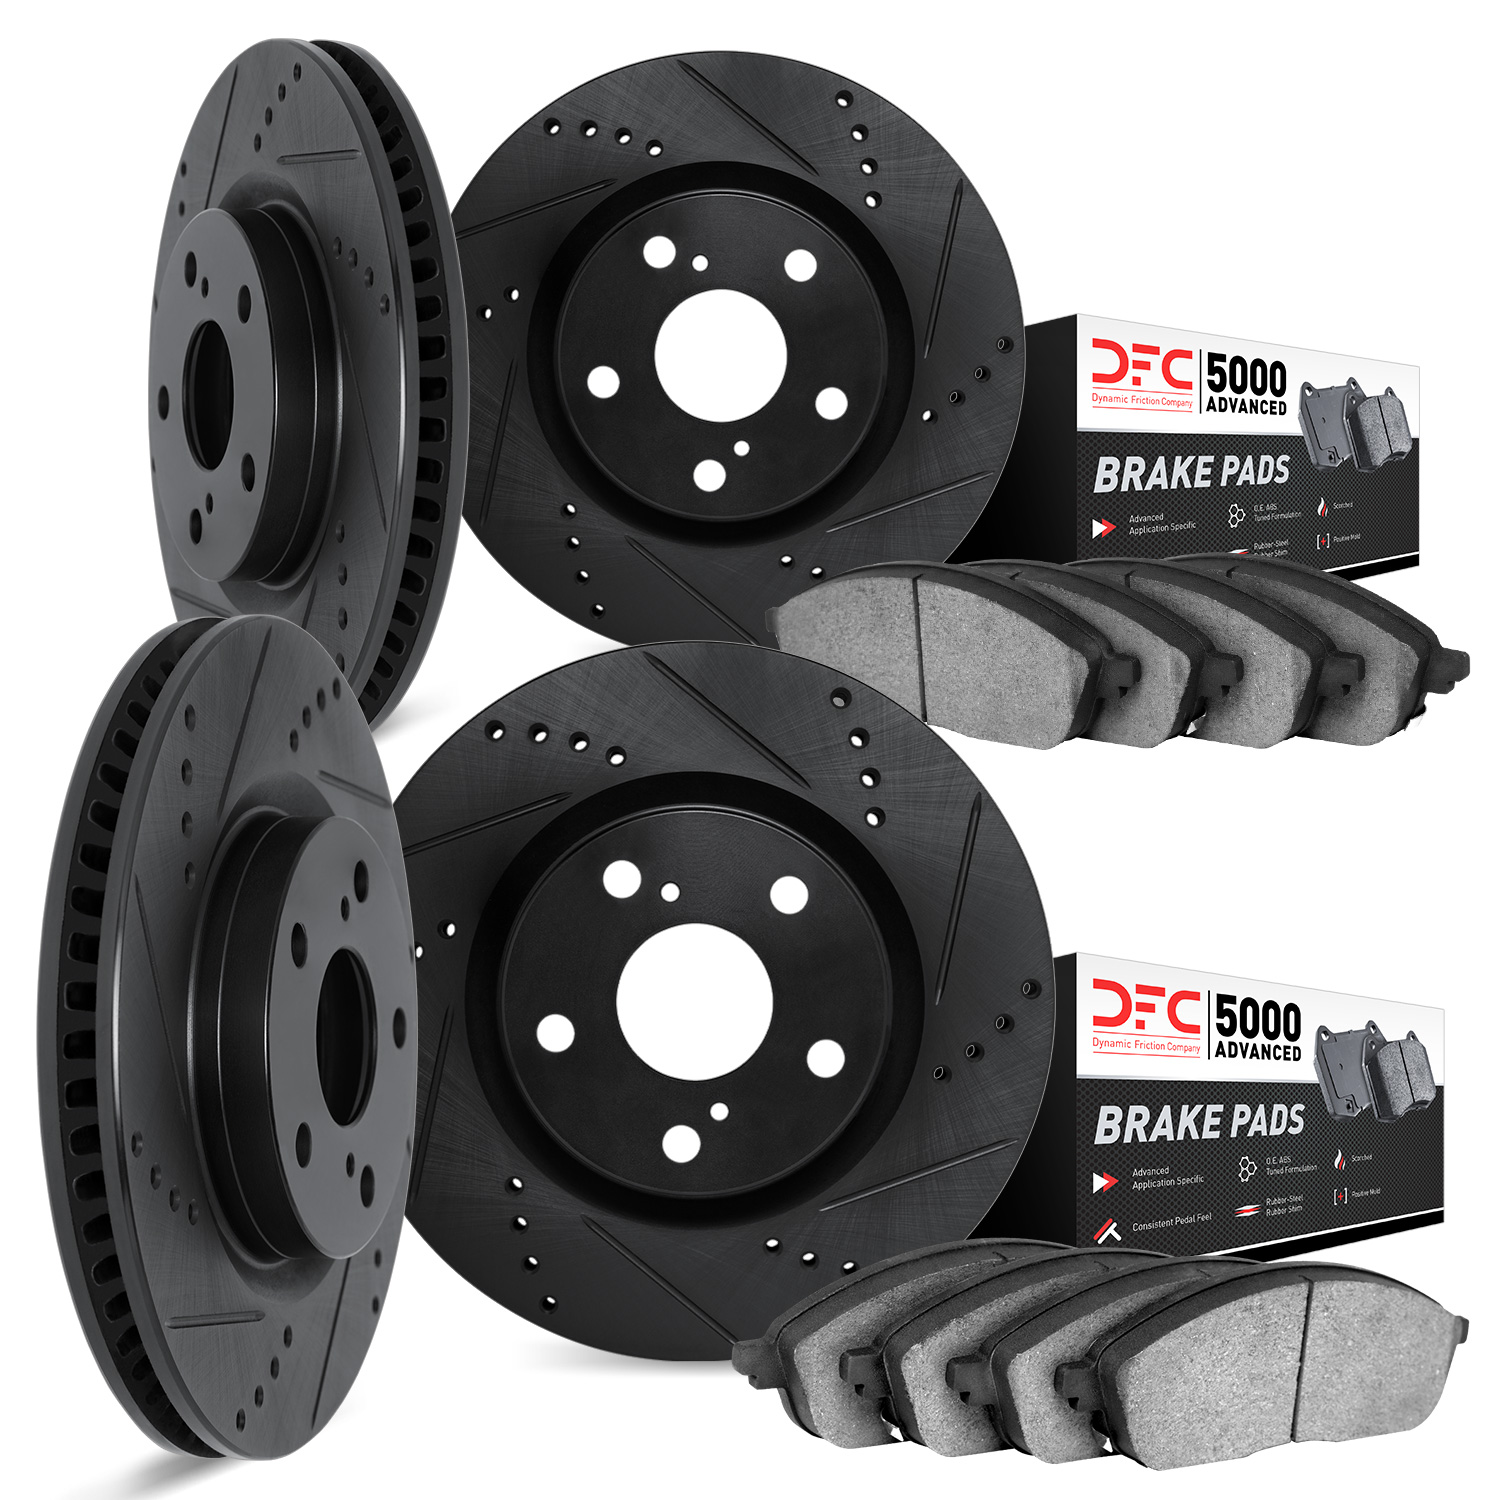 8504-31055 Drilled/Slotted Brake Rotors w/5000 Advanced Brake Pads Kit [Black], 2013-2018 BMW, Position: Front and Rear